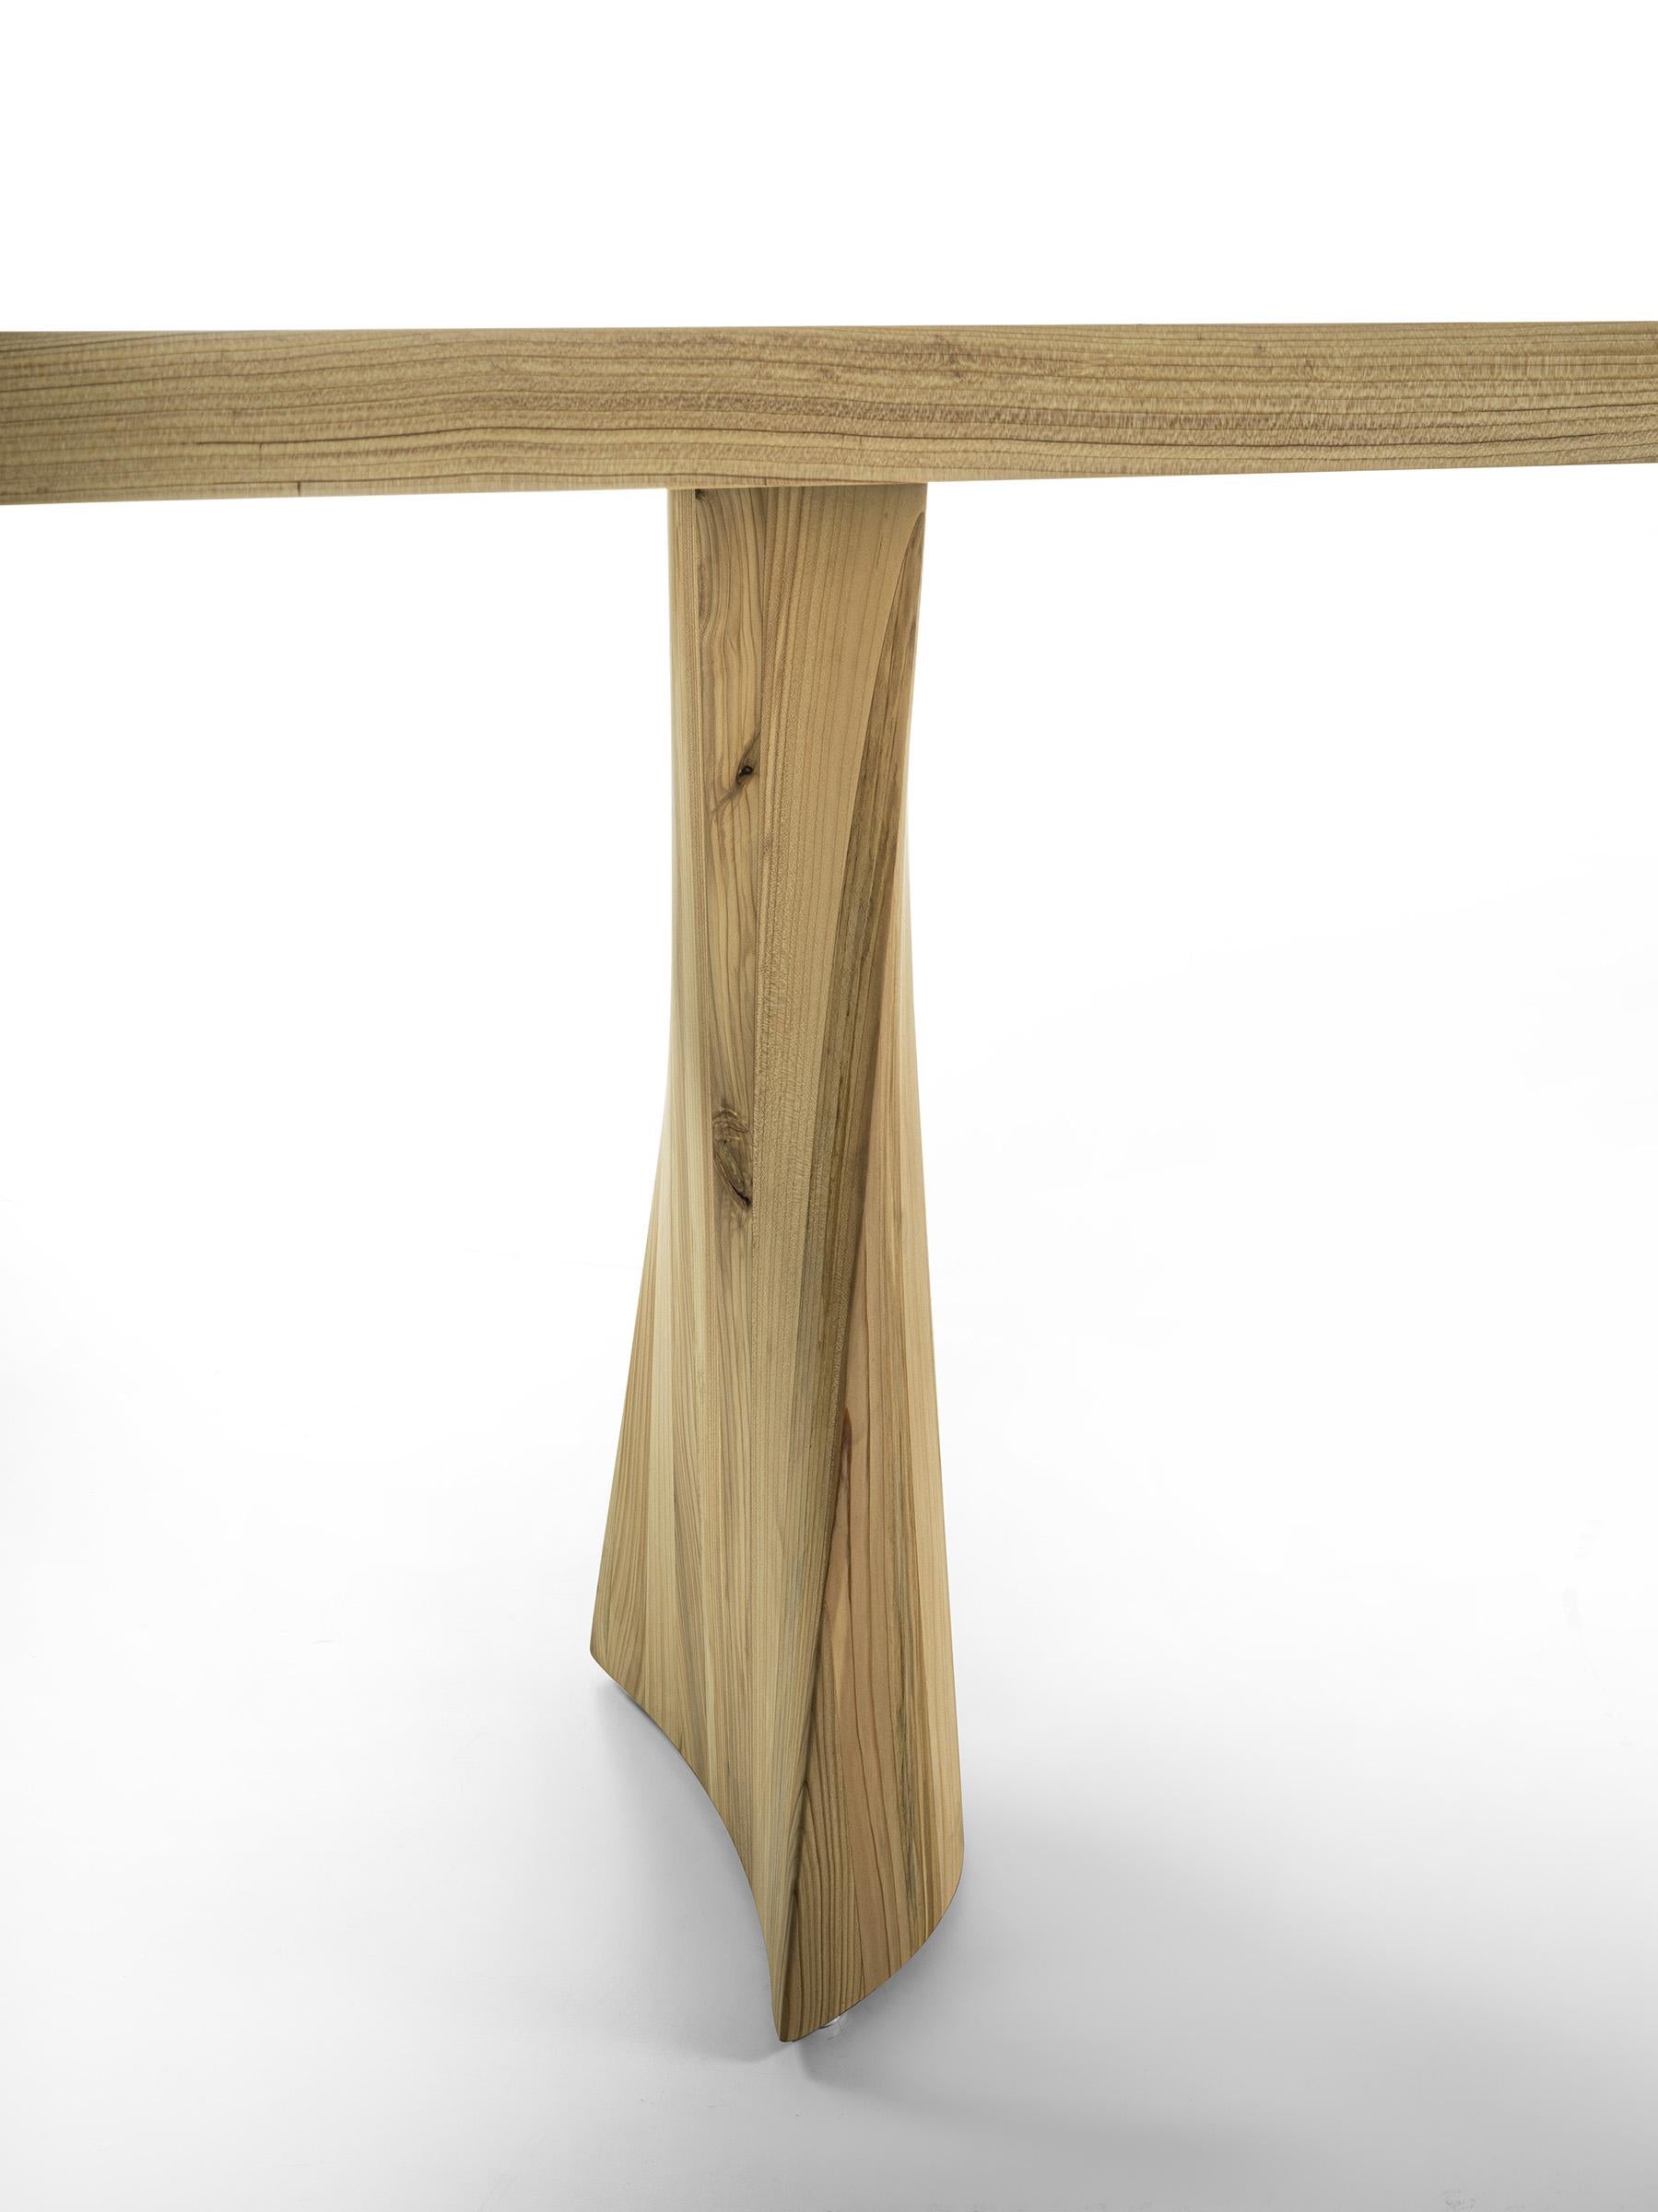 Italian Simple Swing Cedar Outdoor Table, Designed by Studio Excalibur, Made in Italy For Sale